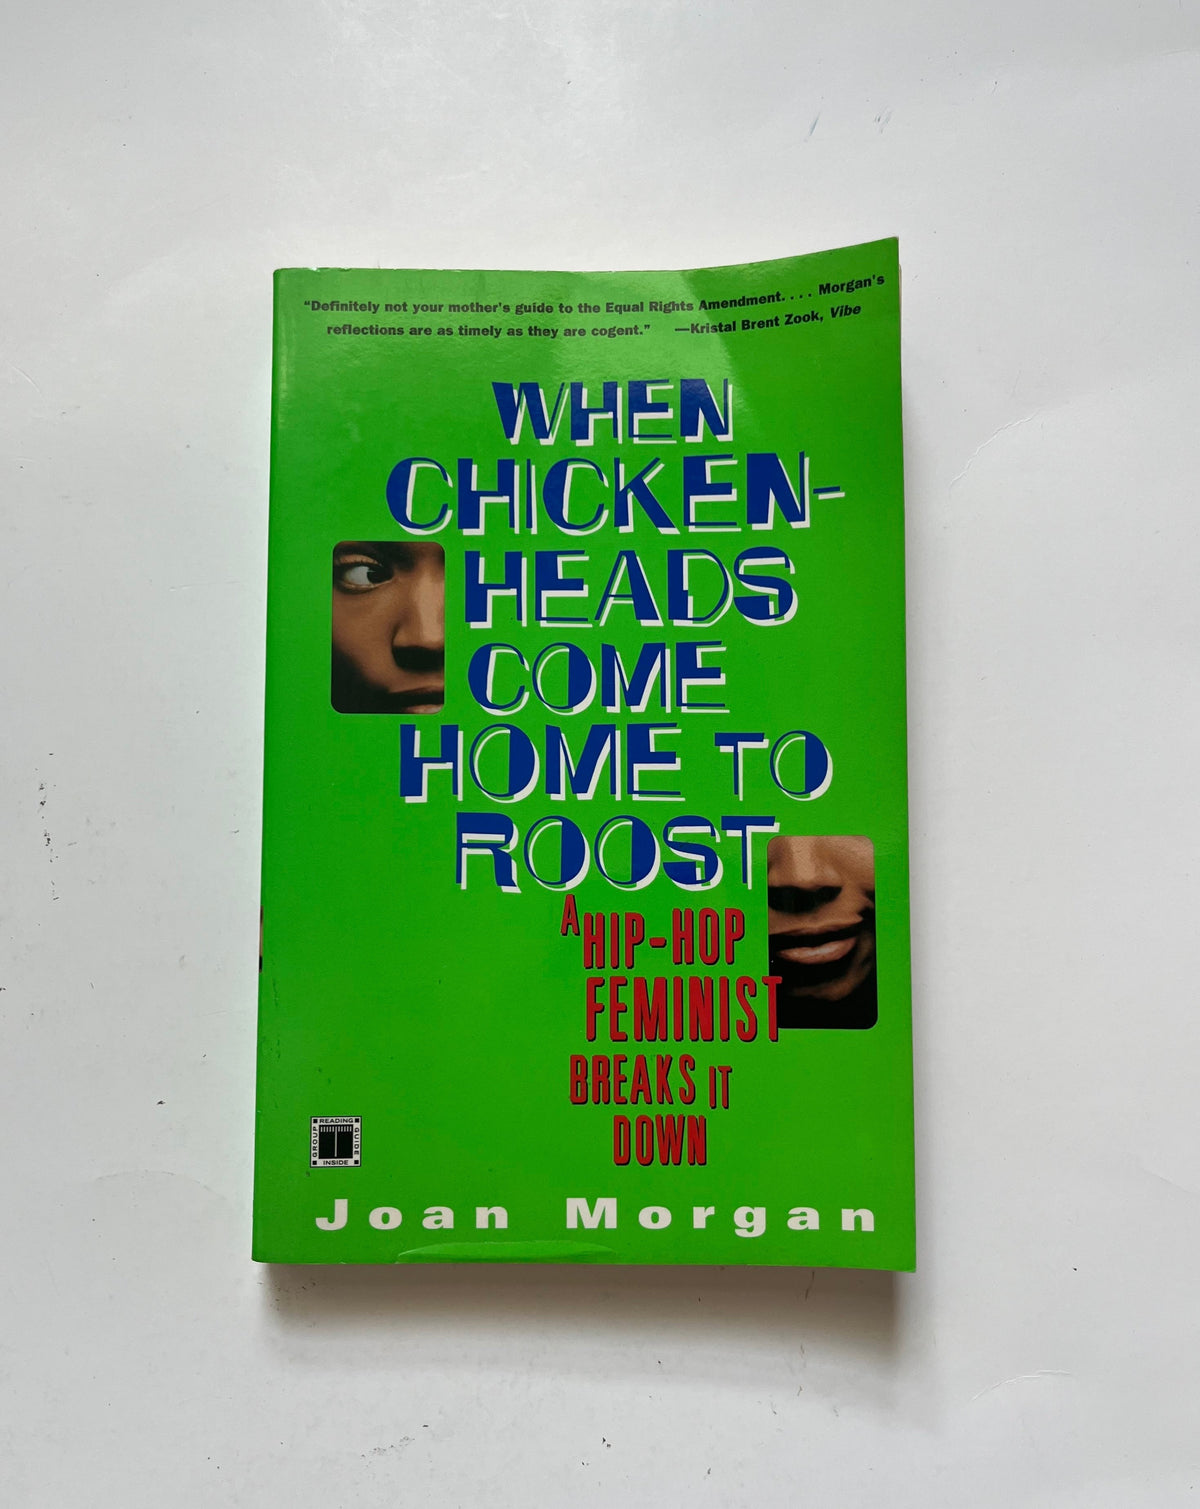 DONATE: When Chickenheads Come Home to Roost by Joan Morgan